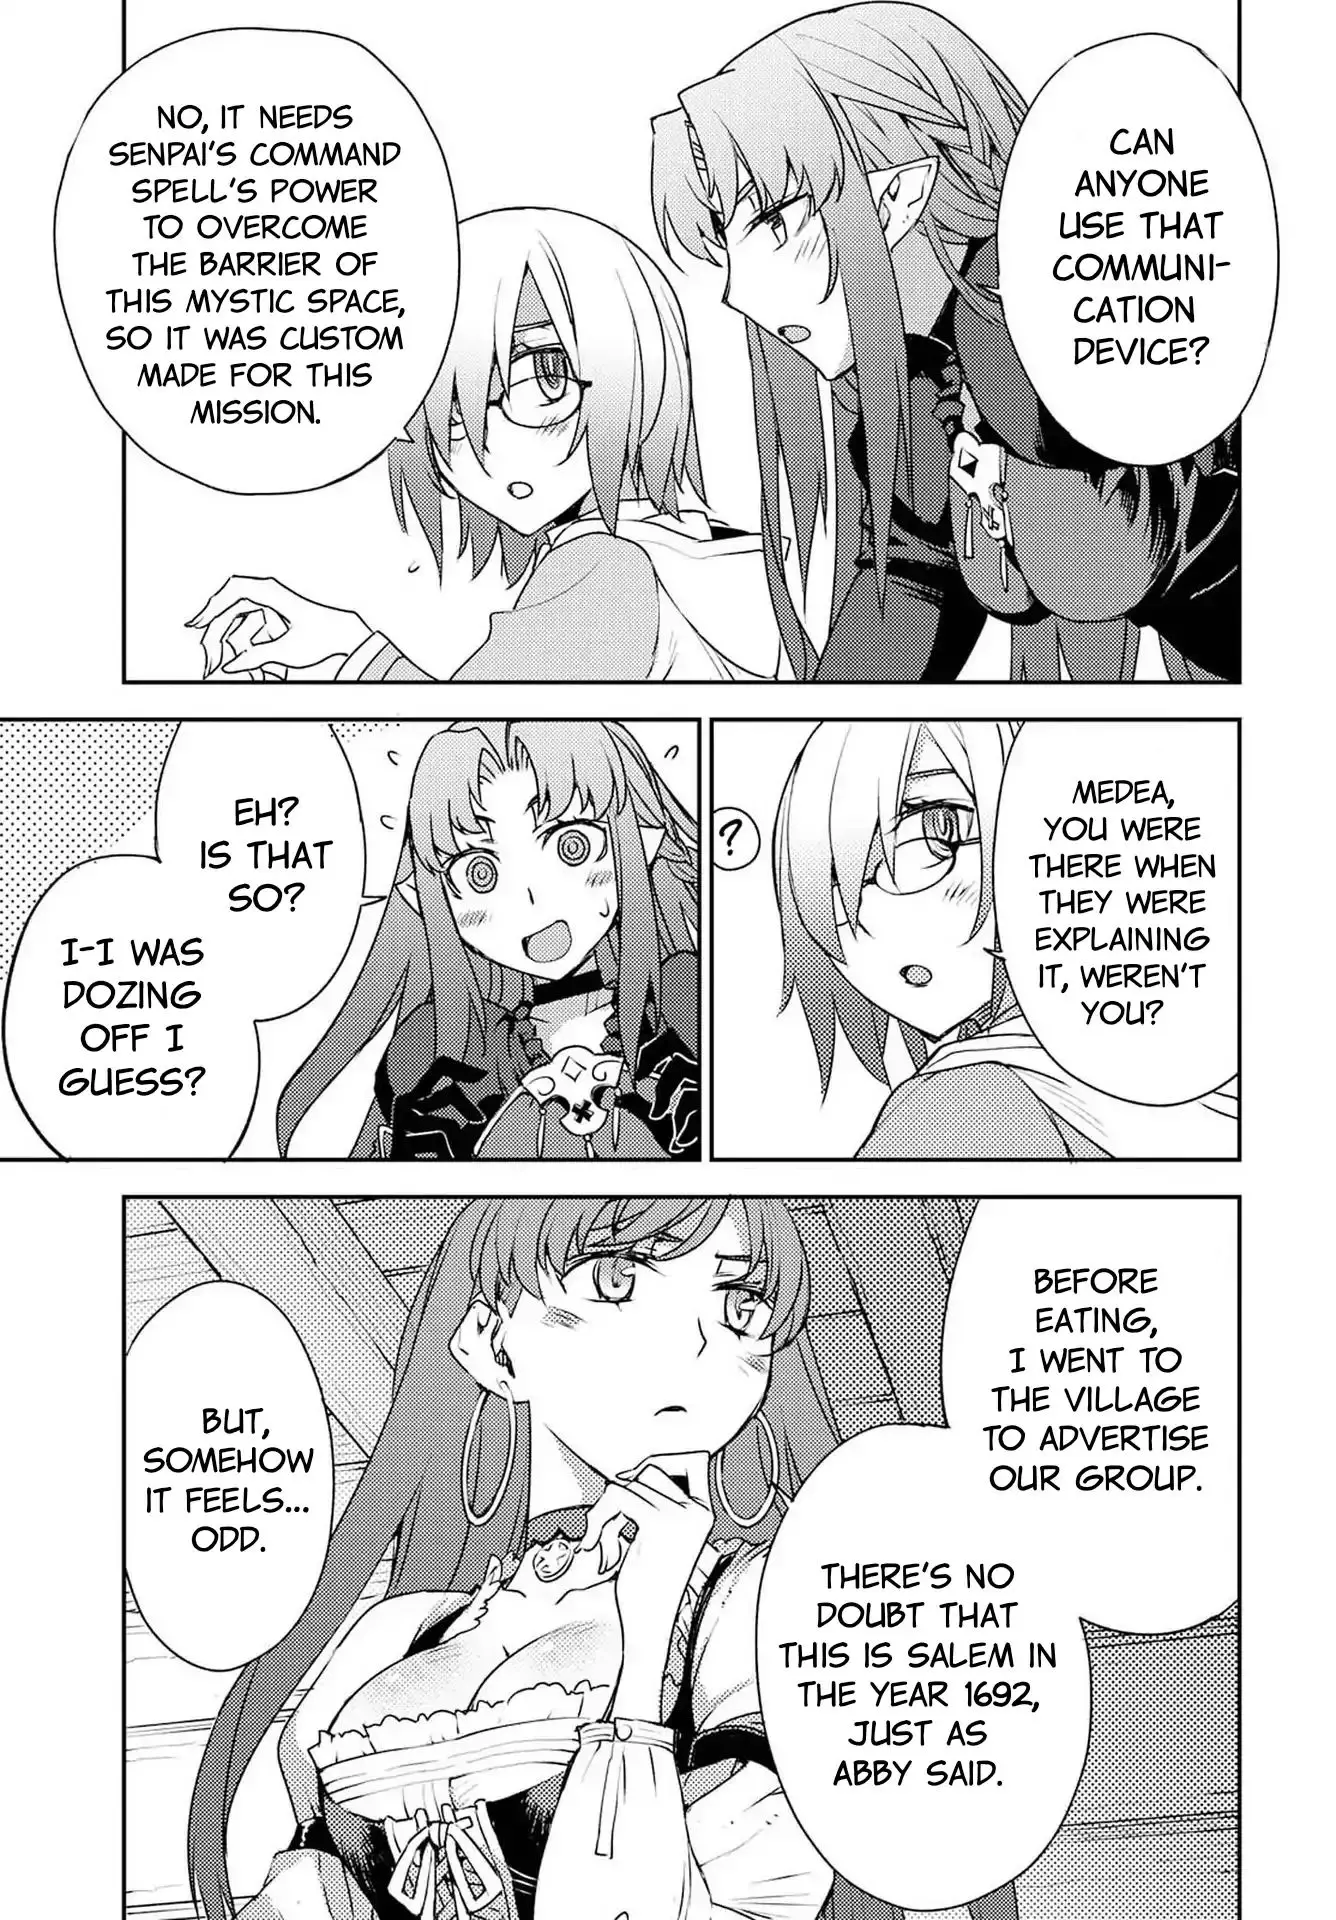 Fate/grand Order: Epic Of Remnant - Subspecies Singularity Iv: Taboo Advent Salem: Salem Of Heresy - 3 page 21